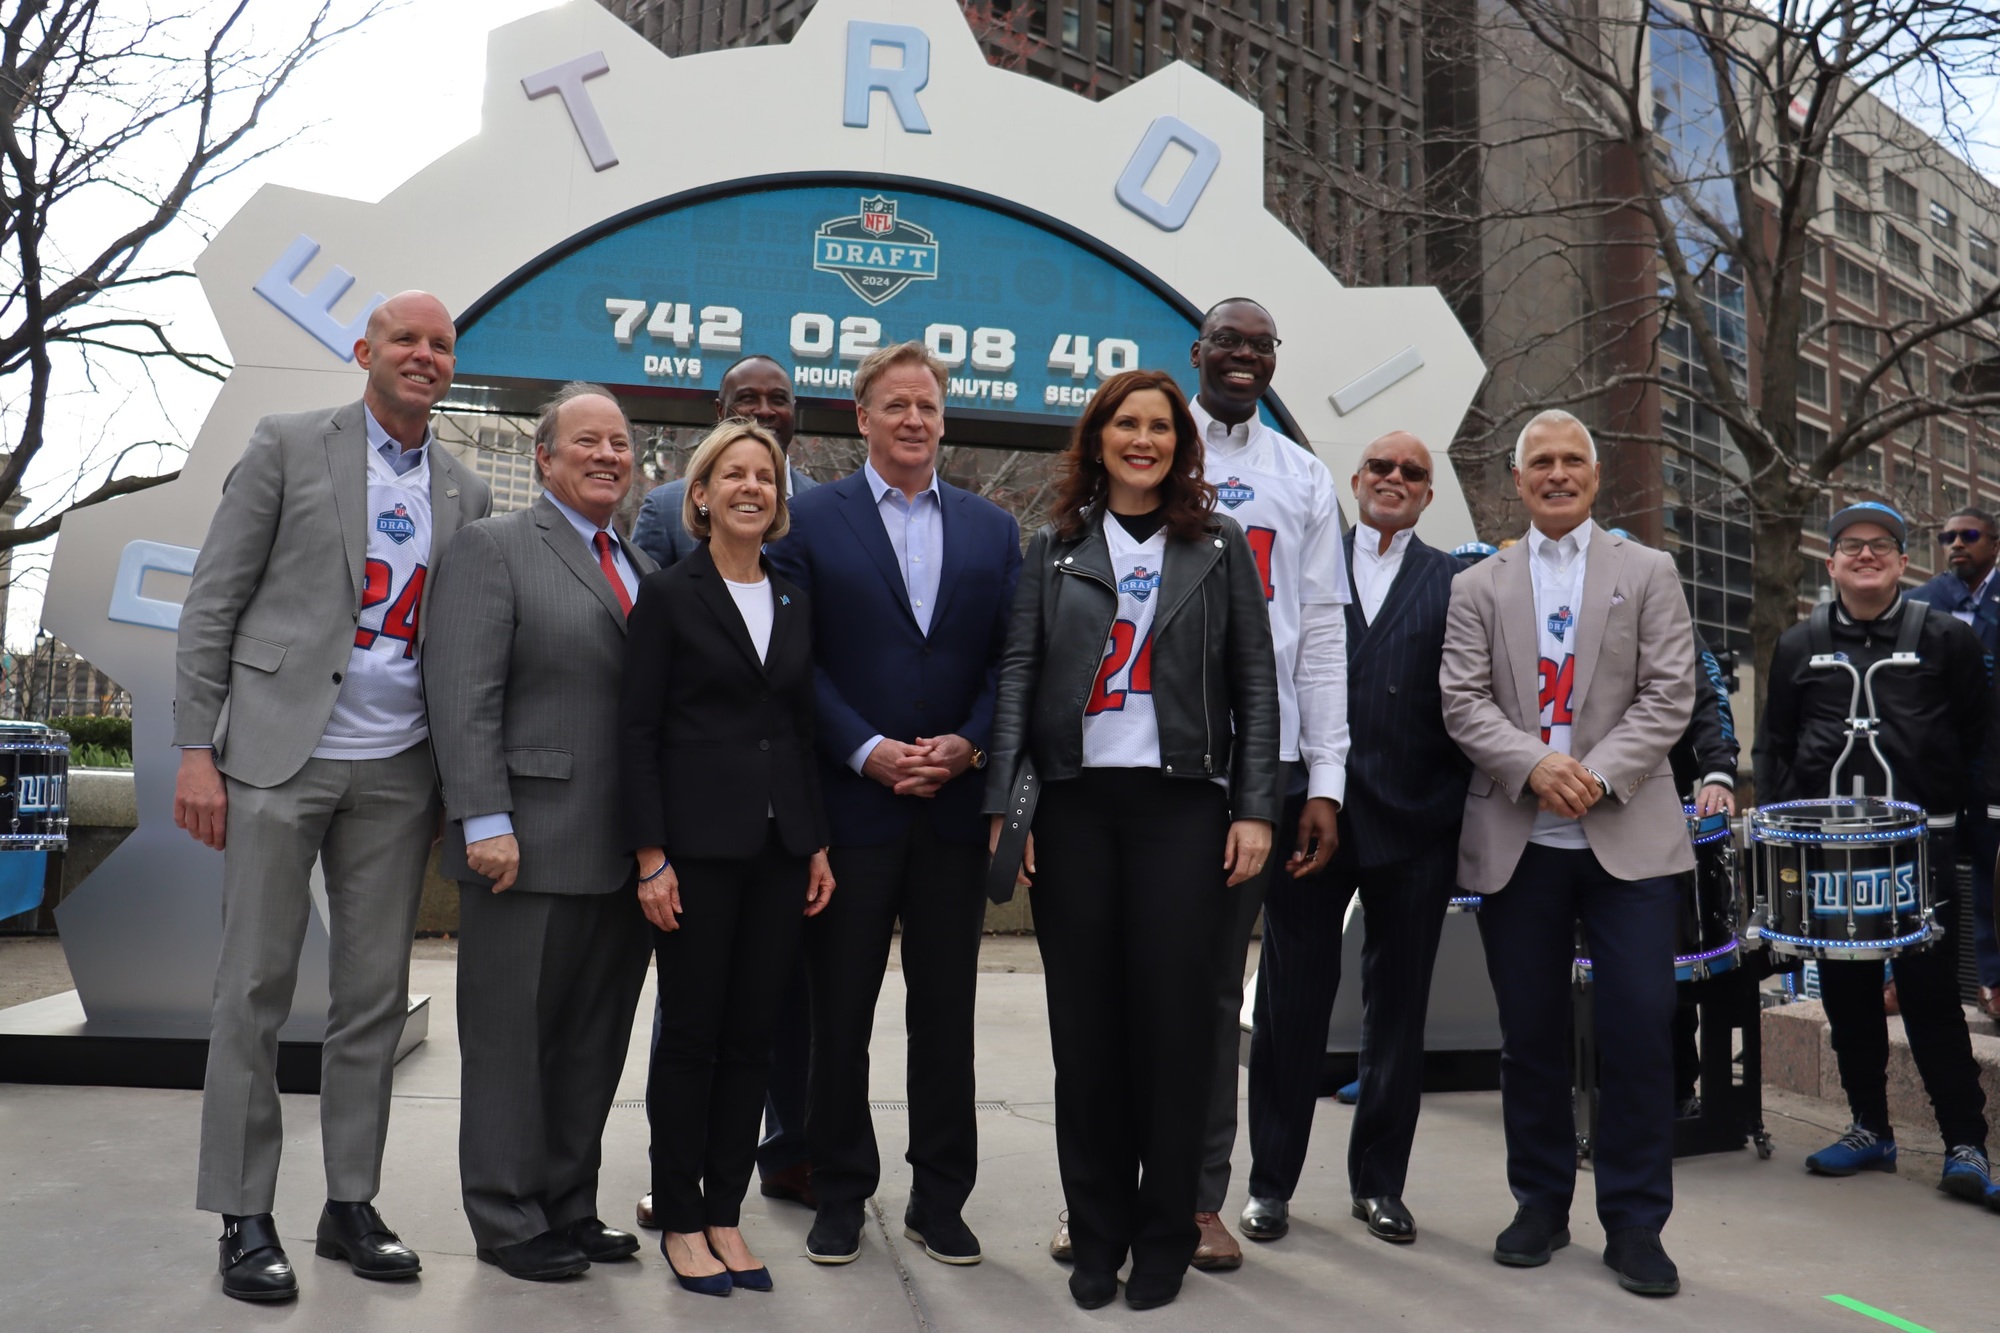 Group photo including Gov. Whitmer, Lt. Gov, Roger Goodell, and other people standing in front of countdown clock for the 2024 NFL Draft